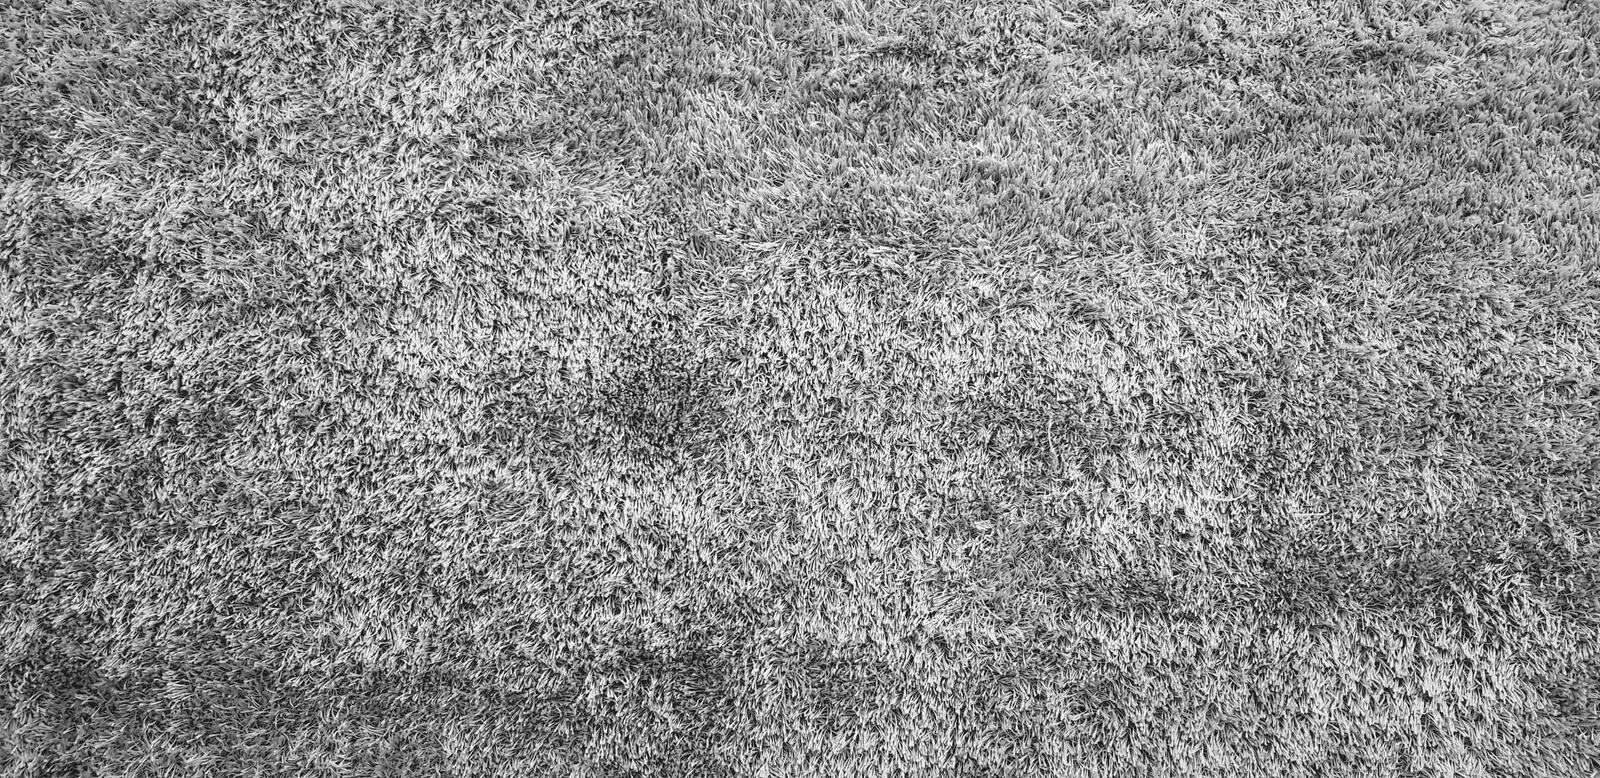 Textured of gray or grey wool carpet or rug for background or wallpaper stock image